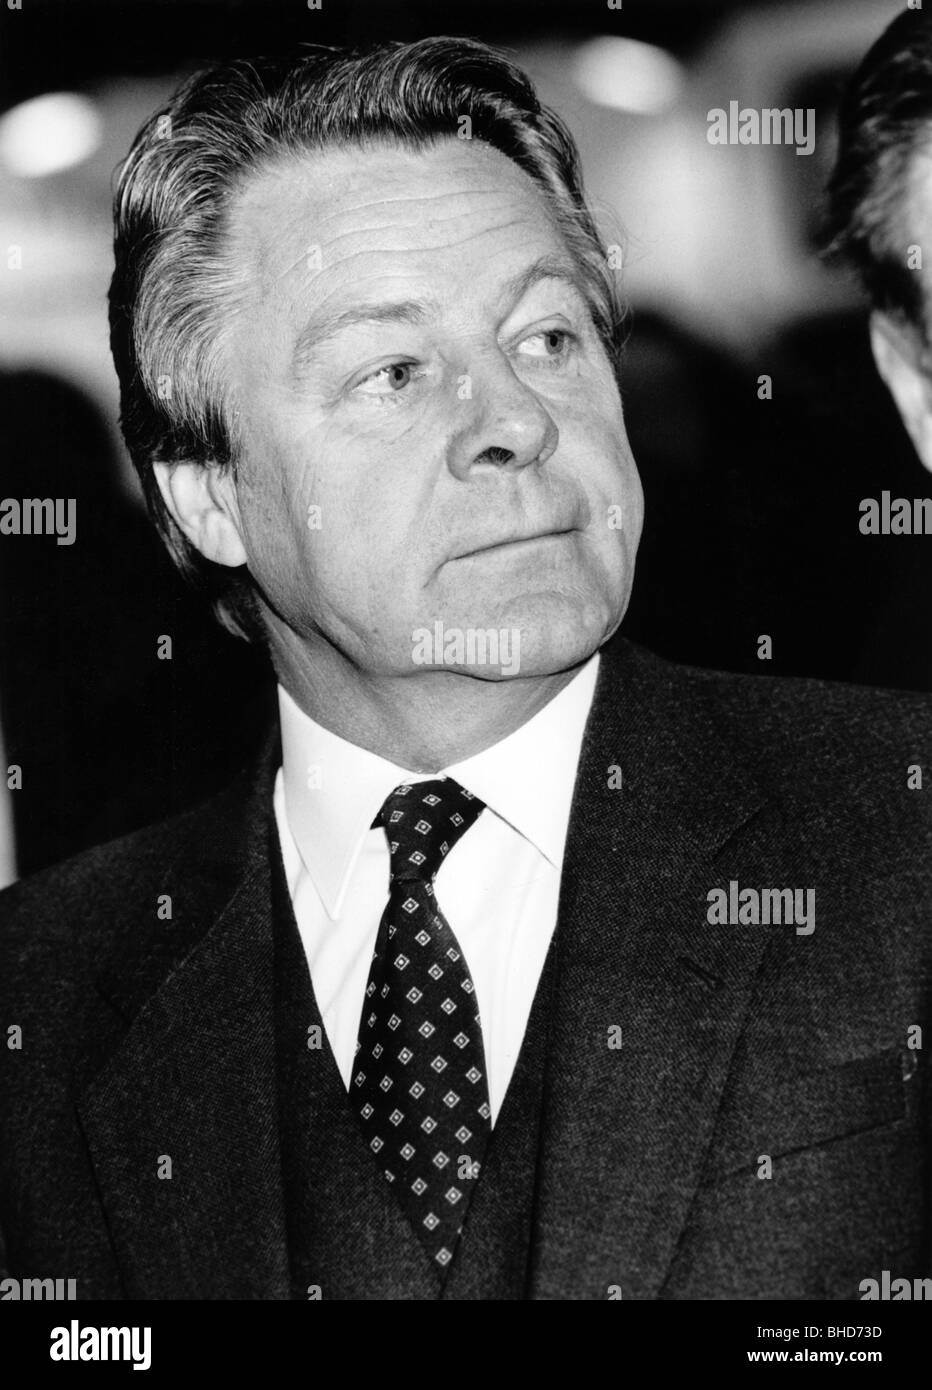 Franke, Heinrich, 26.1.1928 - 26.6.2004, German politician, president of the German federal labour office 1984 - 1993, portrait, during a fair in Hanover, 9. - 16.4.1986, , Stock Photo